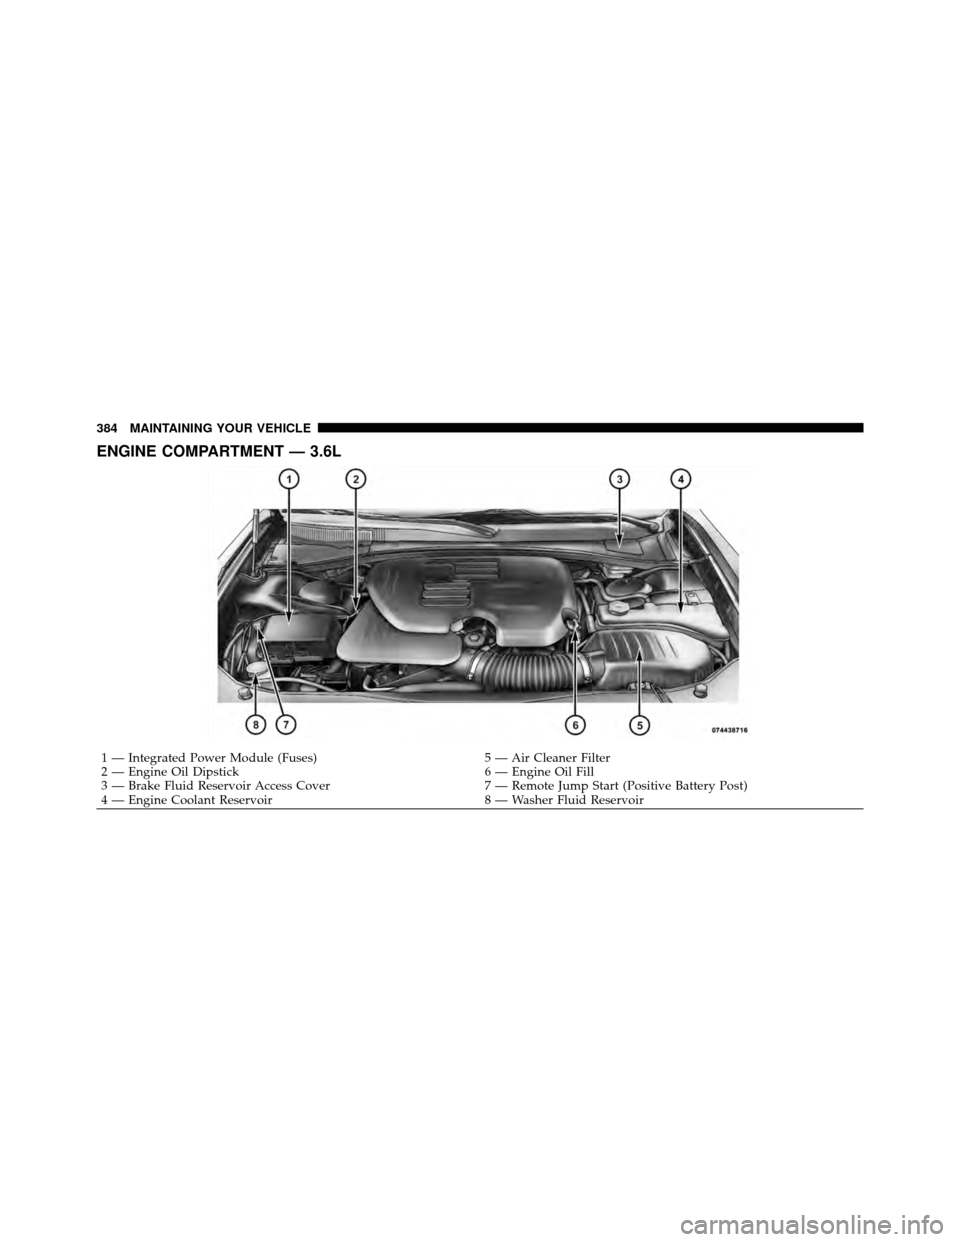 DODGE CHALLENGER 2011 3.G Owners Manual ENGINE COMPARTMENT — 3.6L
1 — Integrated Power Module (Fuses)5 — Air Cleaner Filter
2 — Engine Oil Dipstick 6 — Engine Oil Fill
3 — Brake Fluid Reservoir Access Cover 7 — Remote Jump Sta